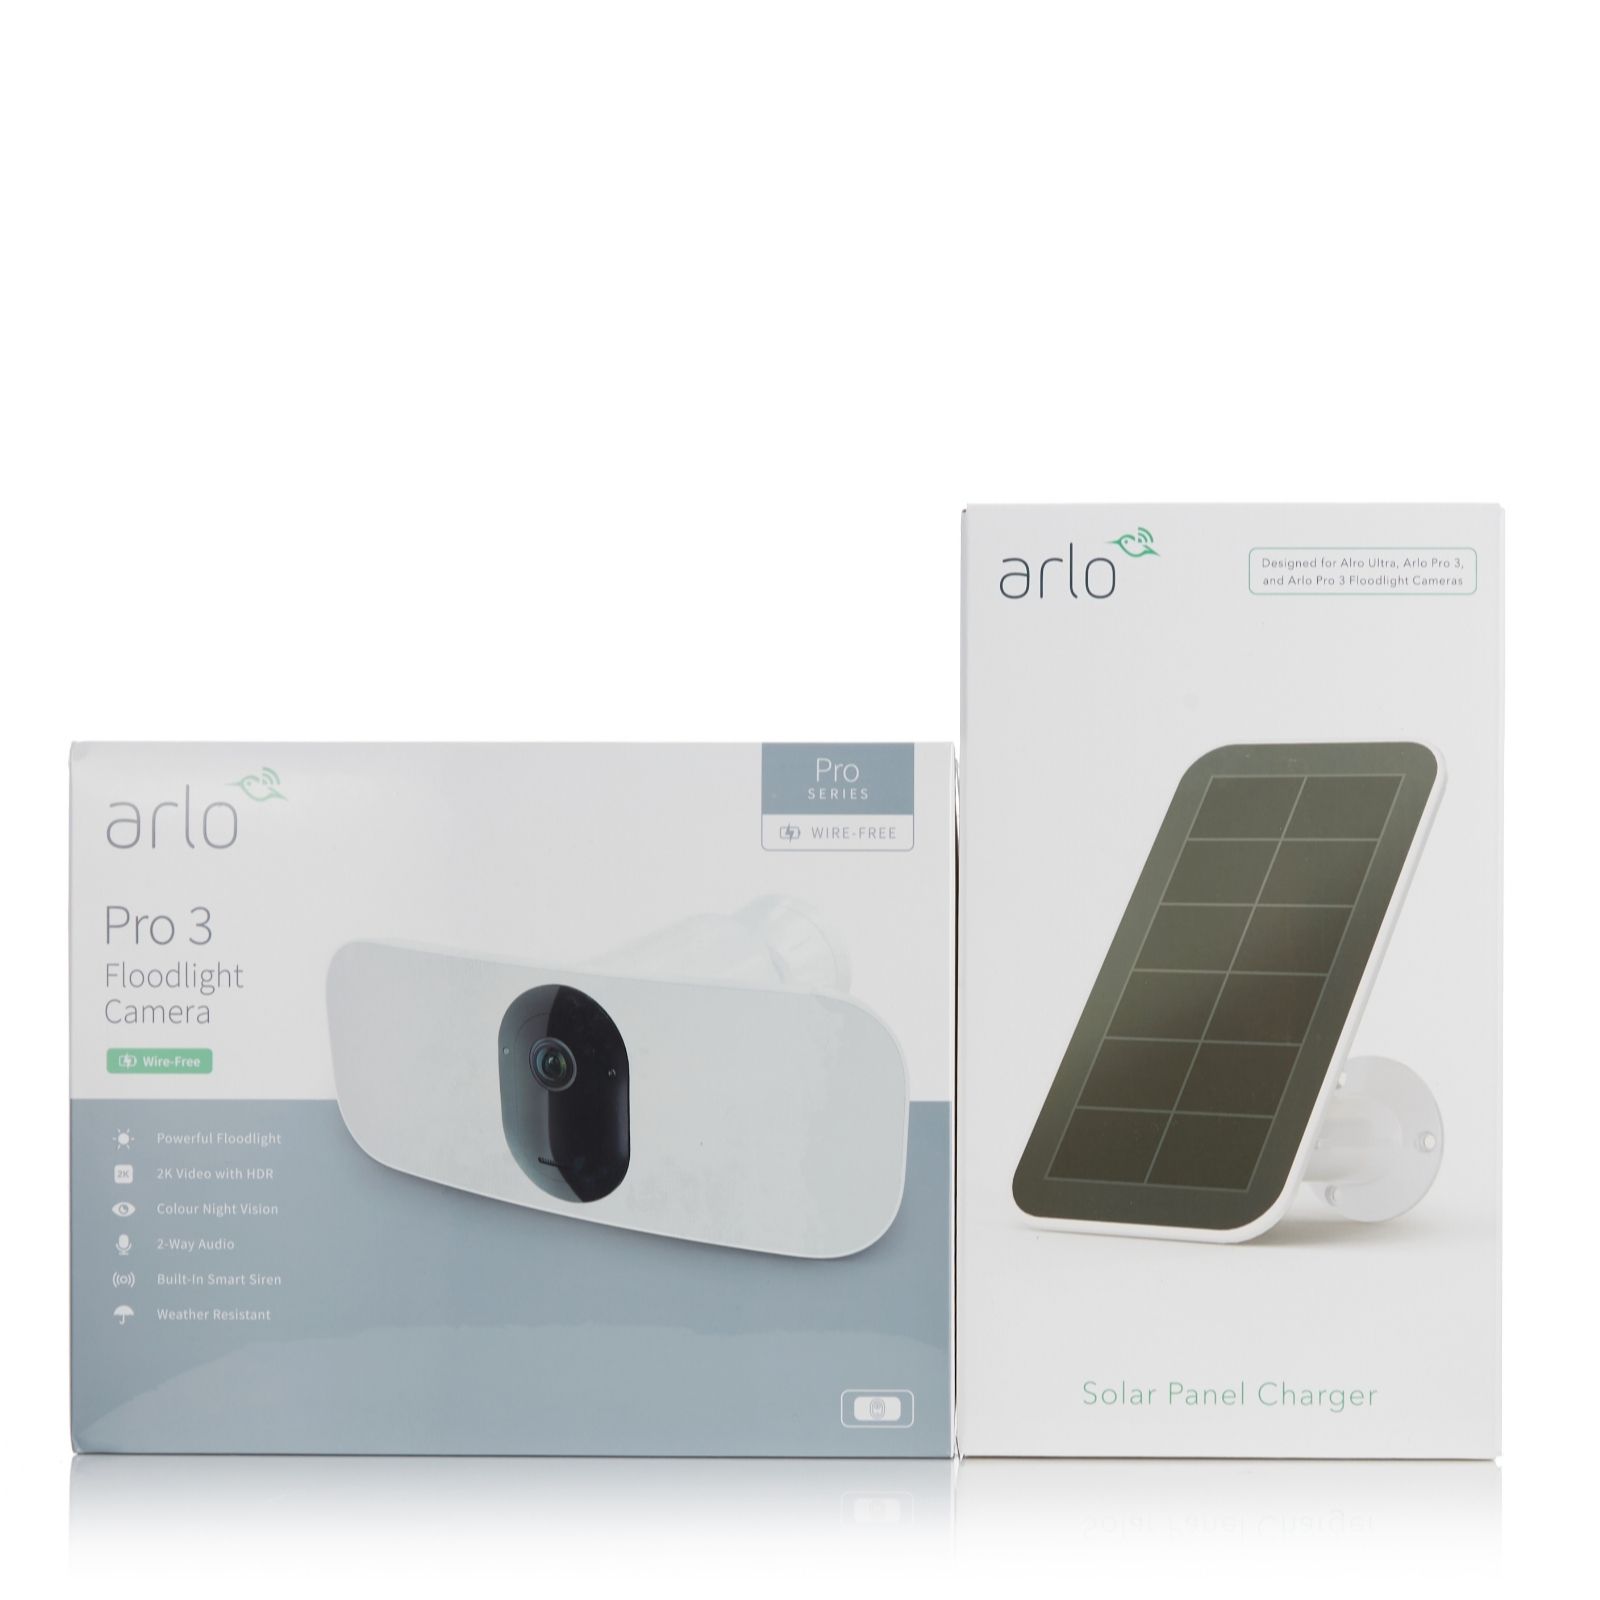 Arlo Pro 3 Floodlight Camera and Solar Panel Charger QVC UK